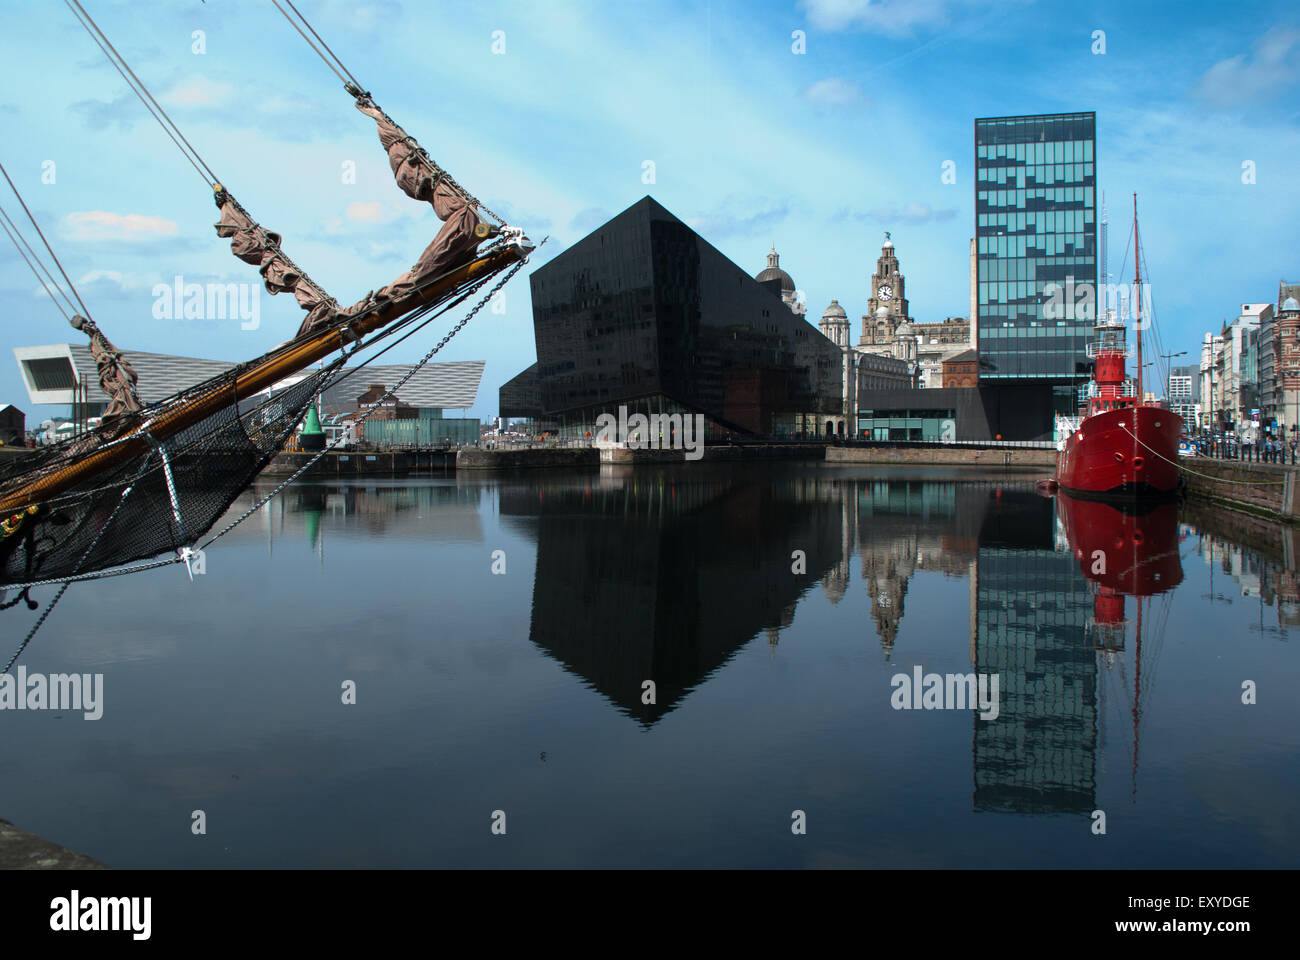 Reflections Canning Dock Liverpool Stock Photo